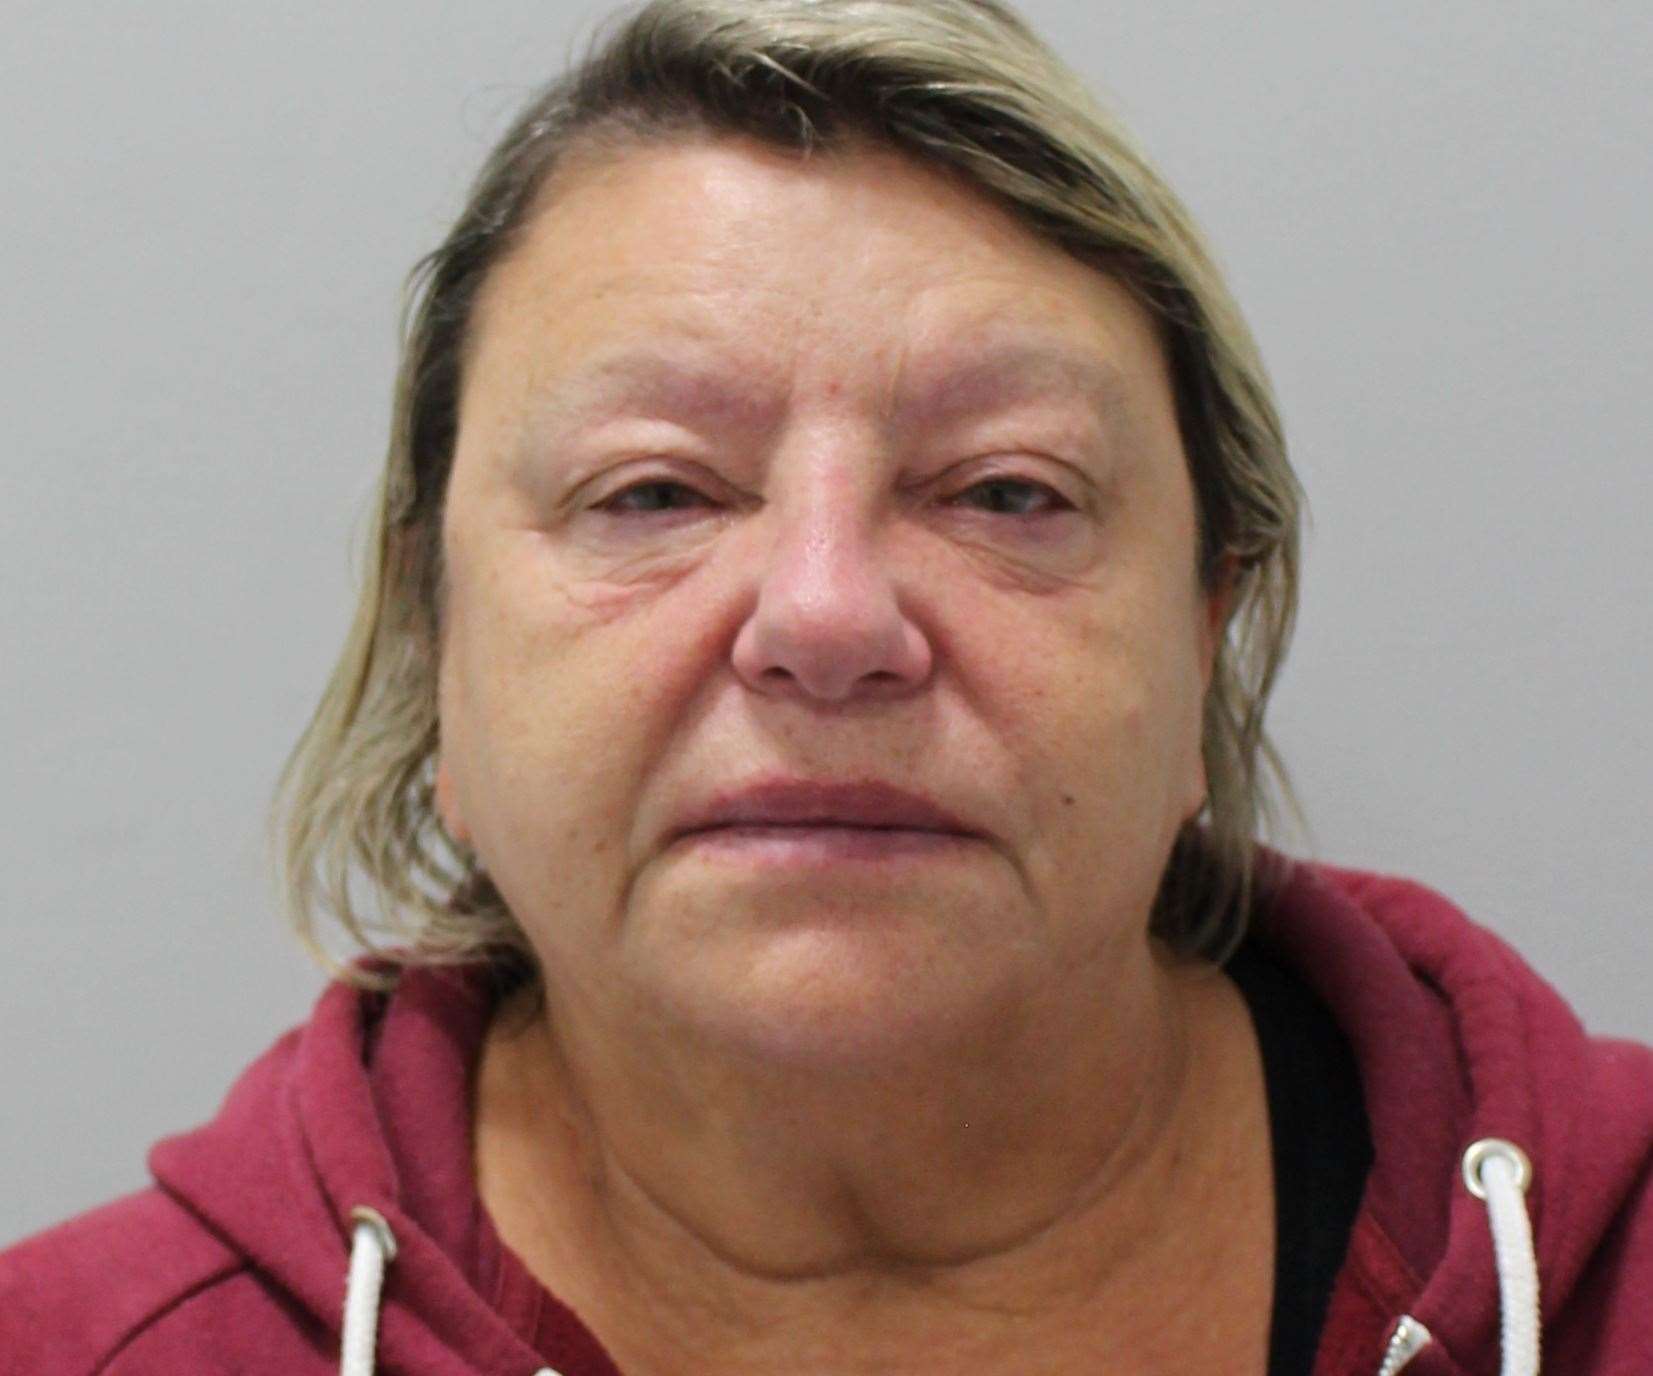 Tracey Cook tried to hide weapons and drugs in a park